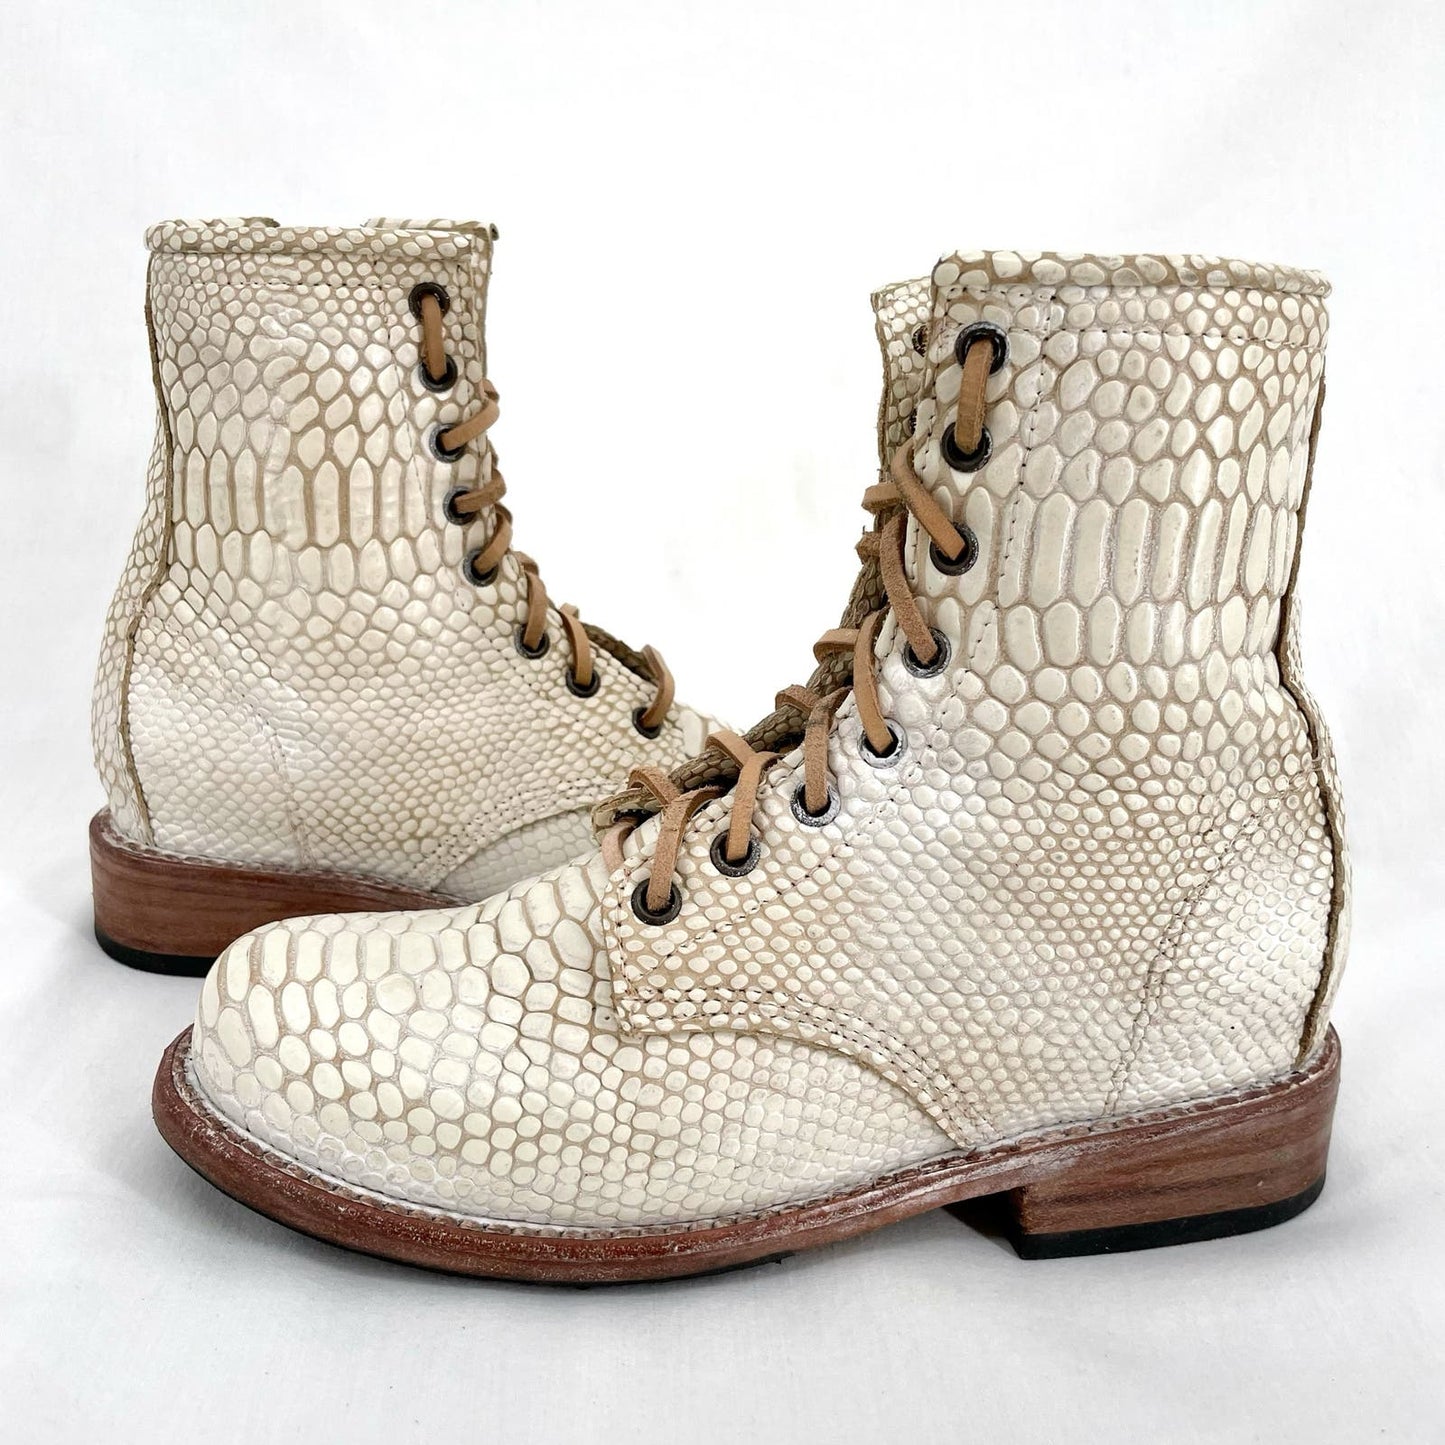 Freebird by Steven Manchester White Snake Leather Wrap Lace Up Boho Boots Size 6